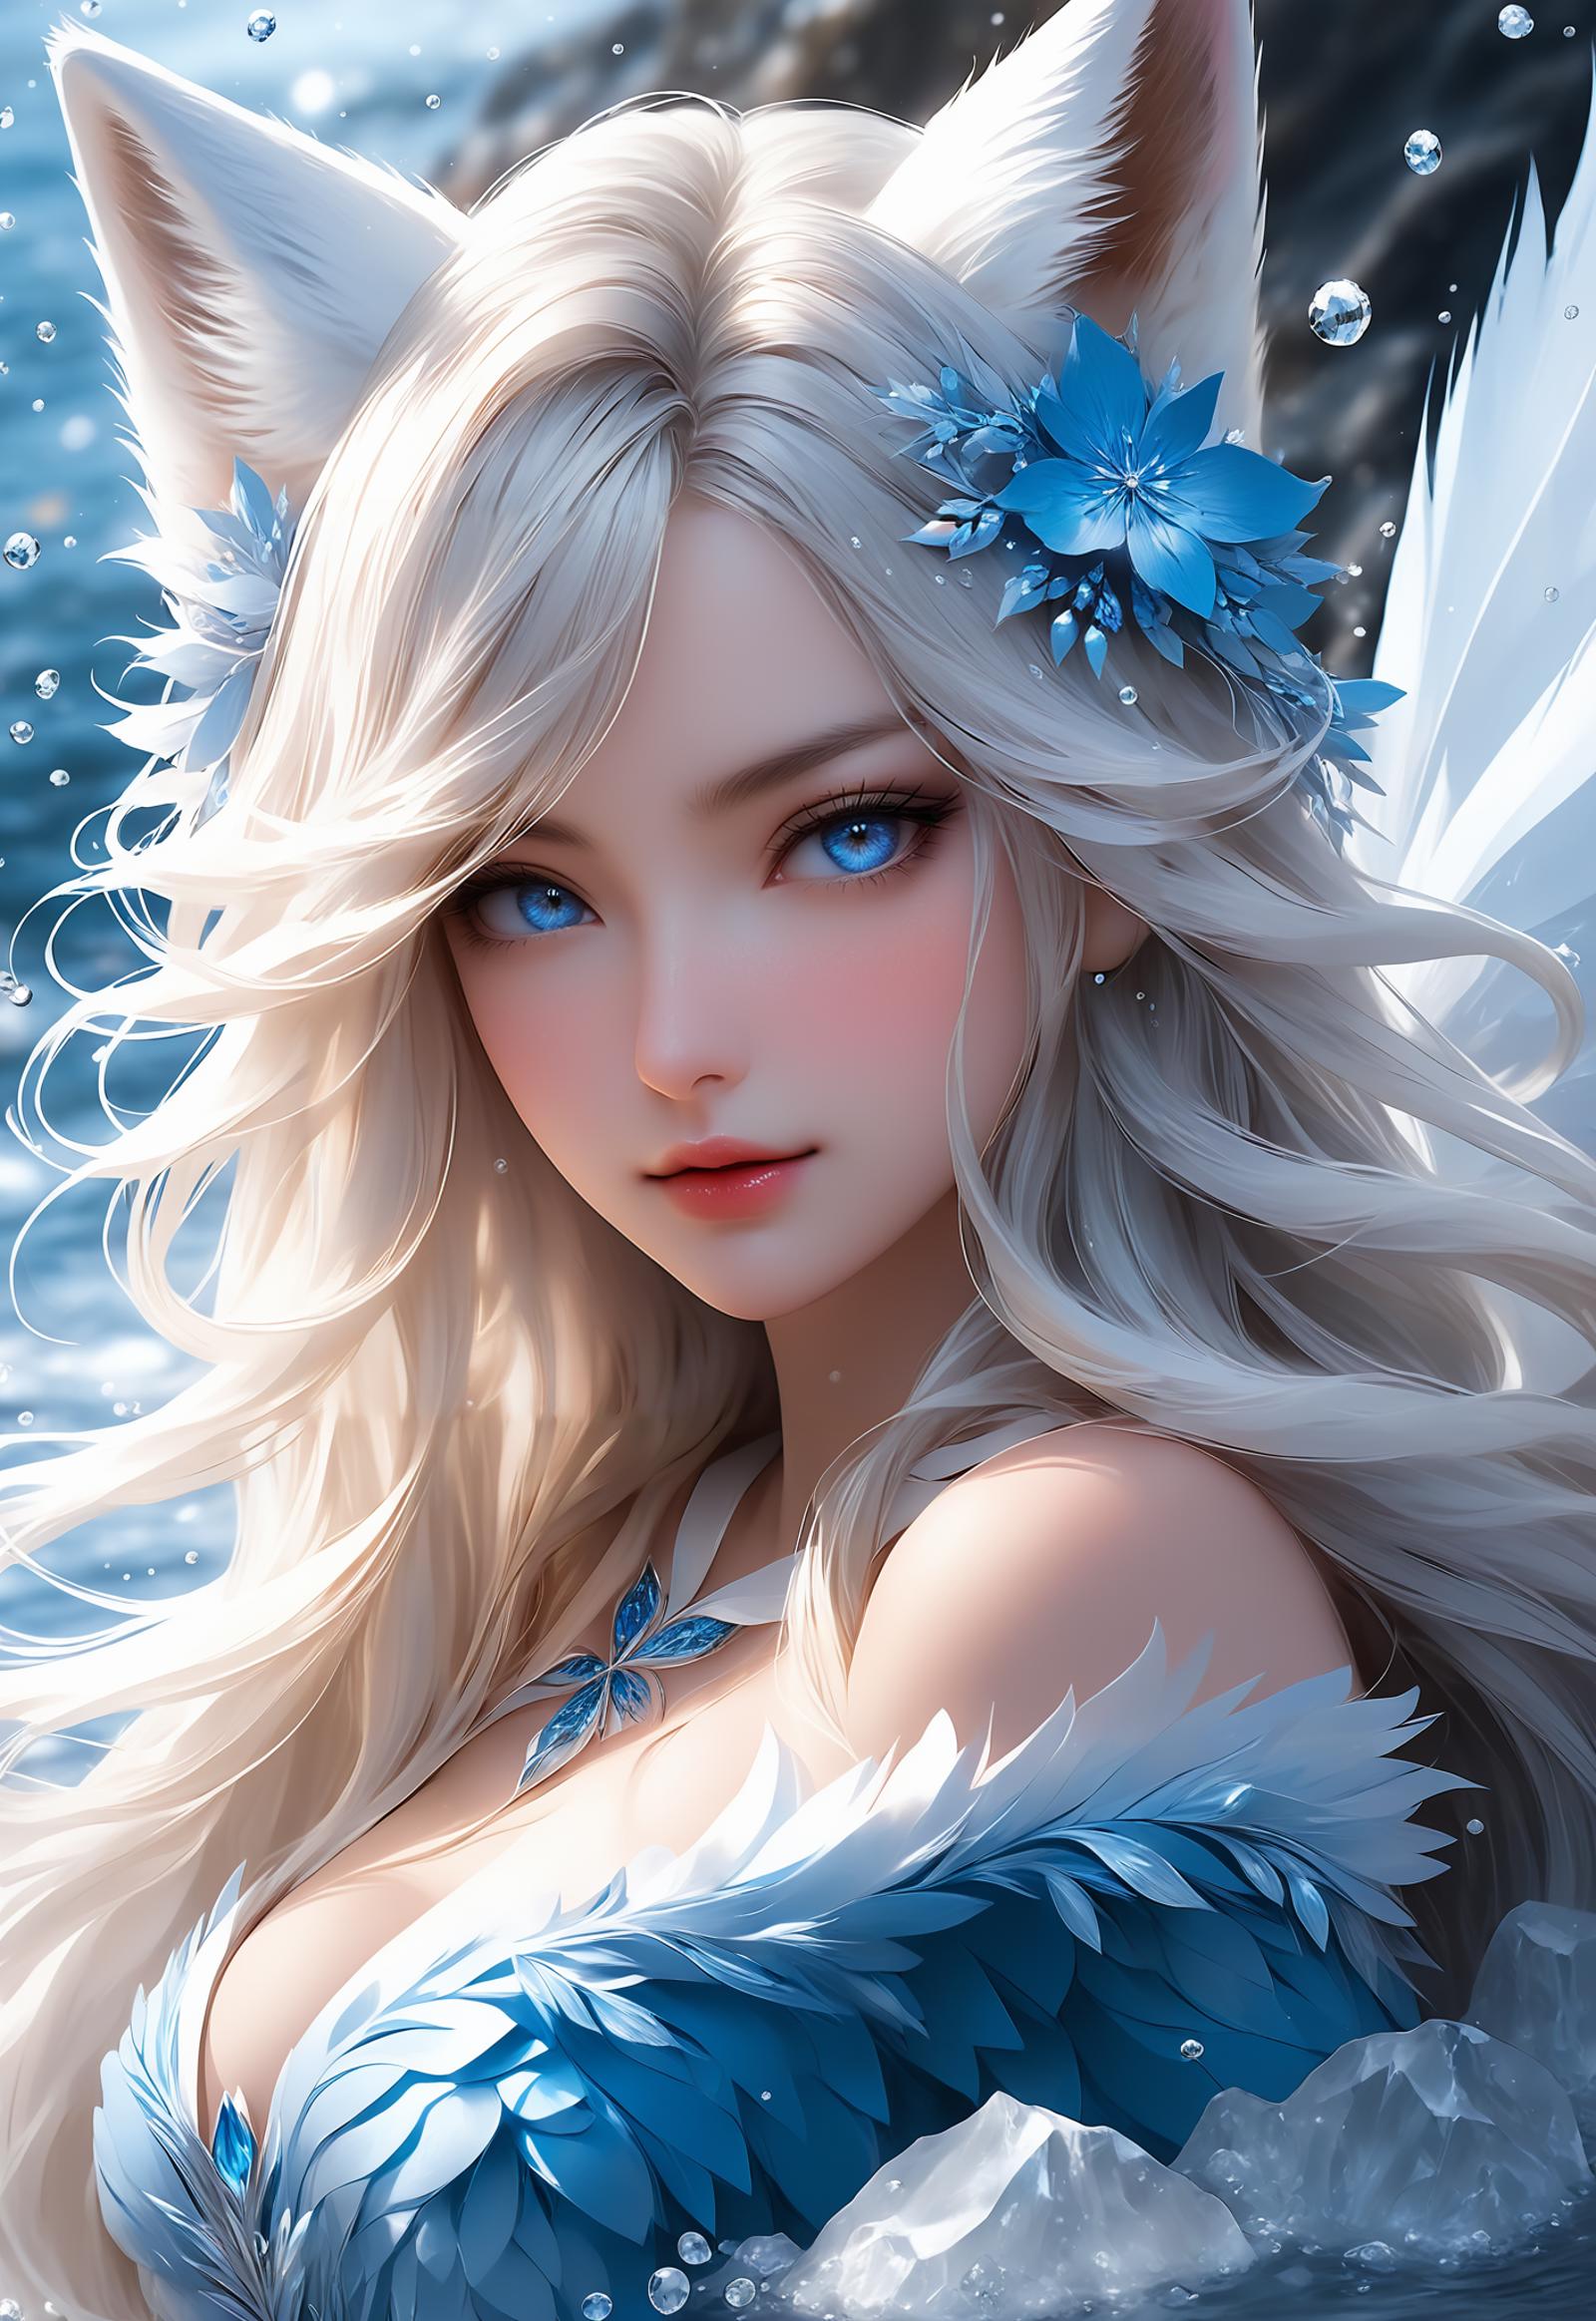 A beautiful white-haired anime girl with blue eyes and a blue flower in her hair.